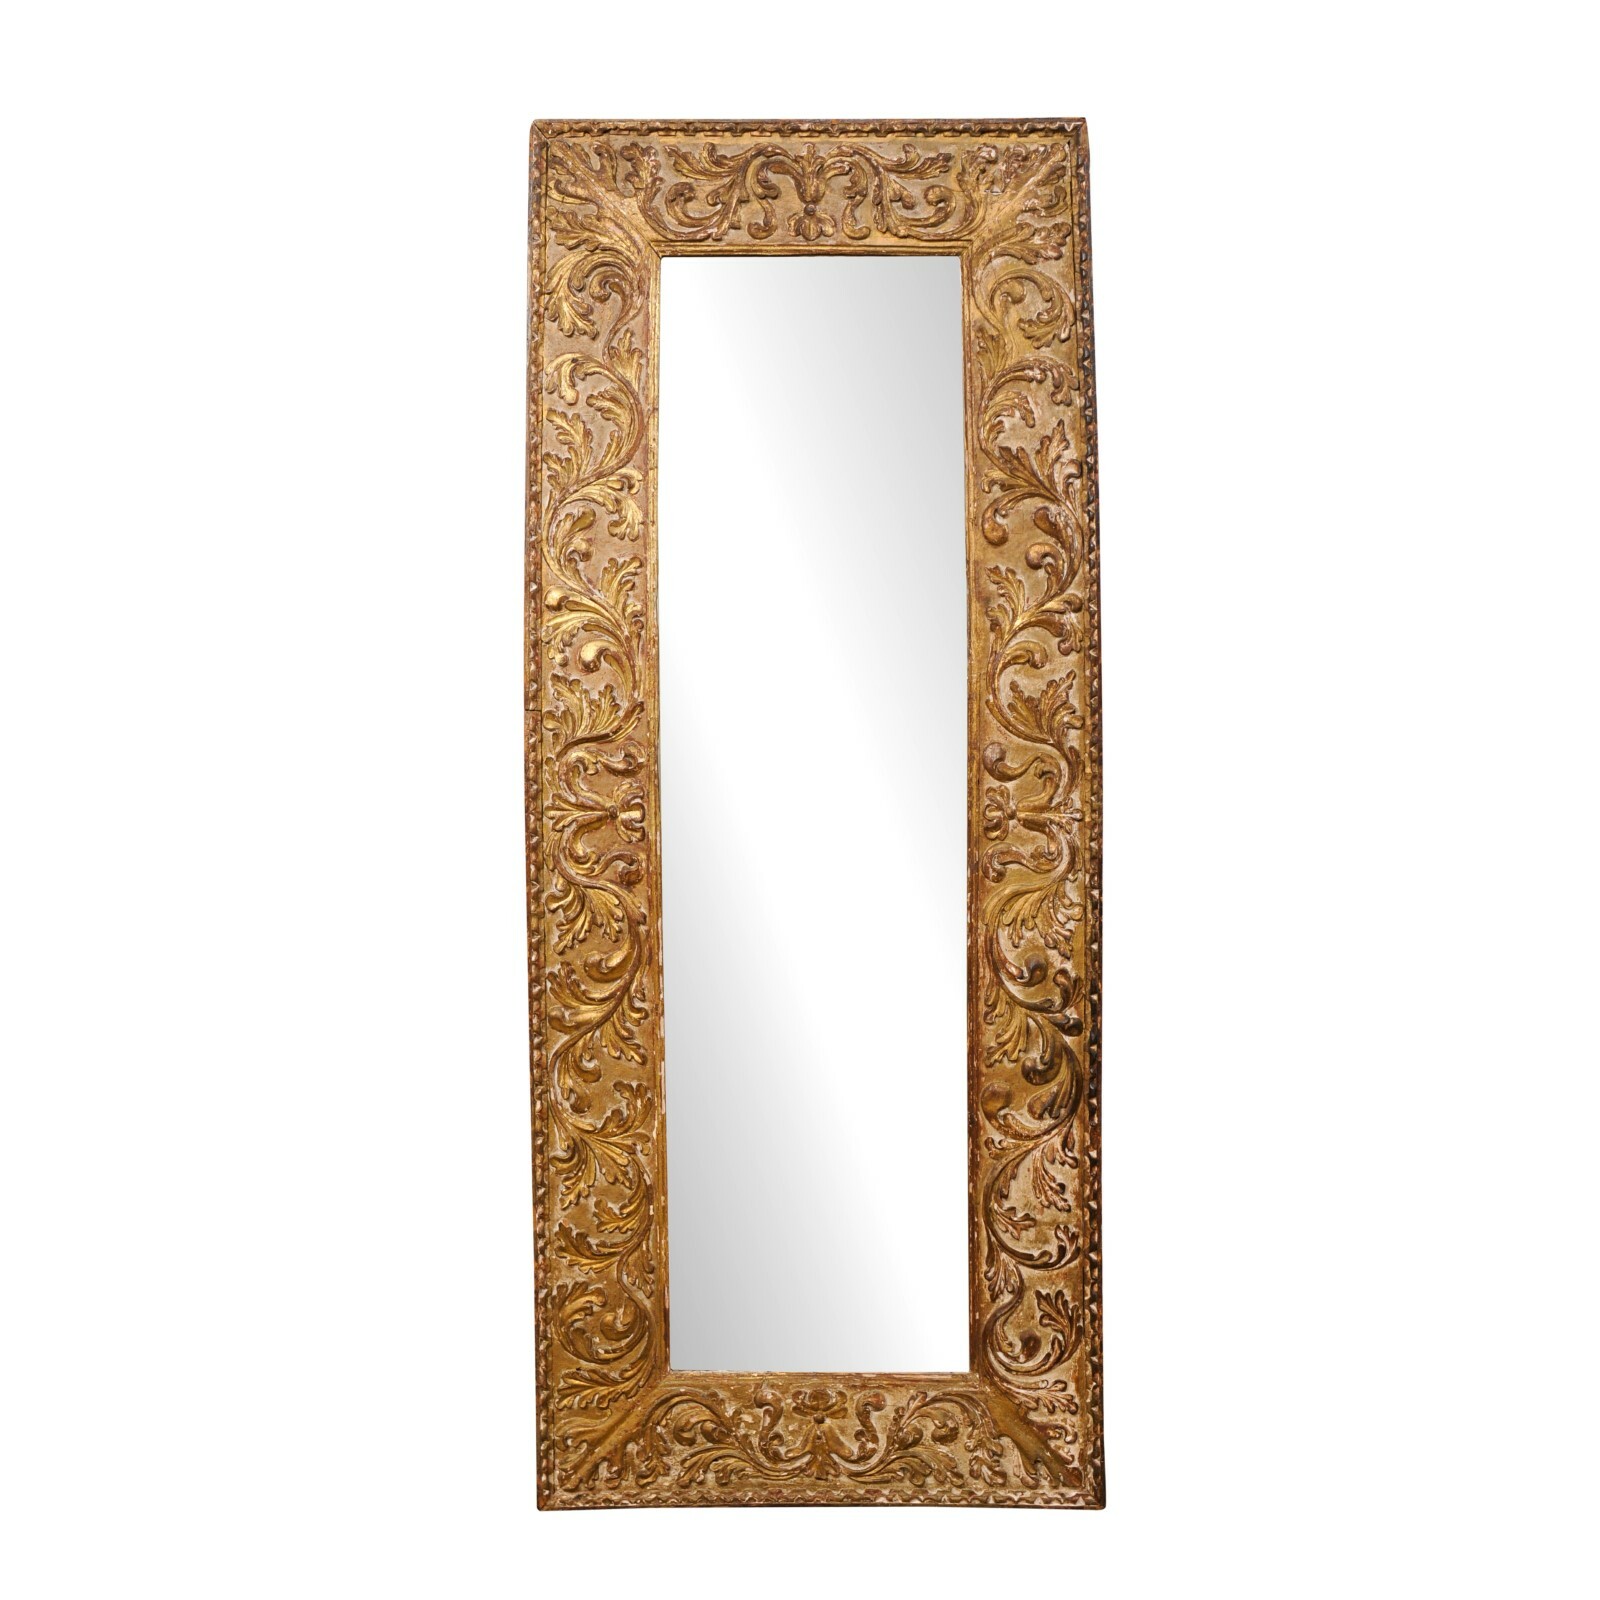 Period Baroque 7.5 Ft Carved Mirror, Italy